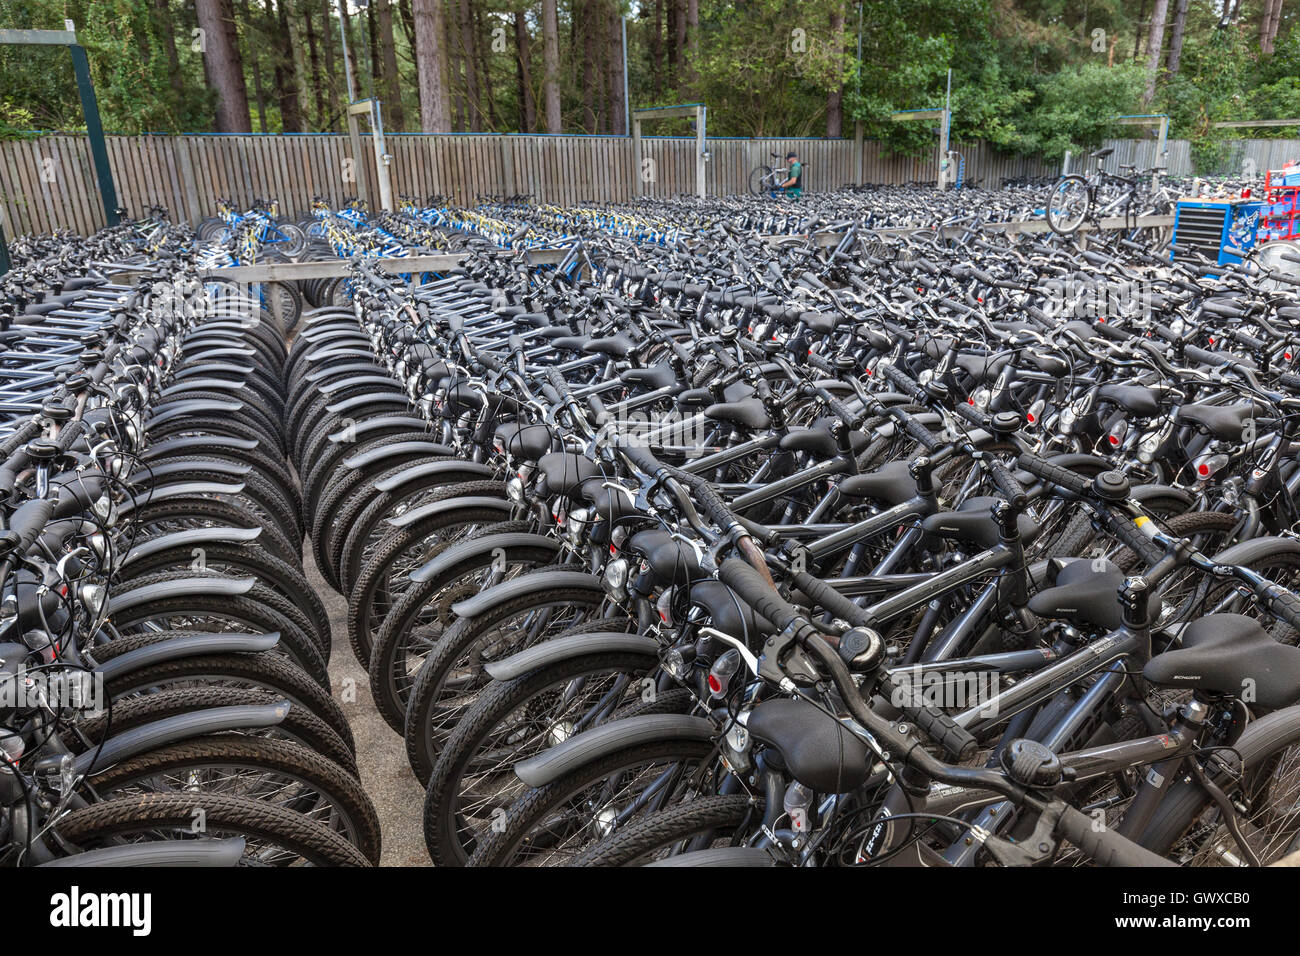 Centre Parcs Sherwood Forest, Nottingham, England, September 4th 2016: Many bikes at the cycle centre at Centre Parcs Sherwood F Stock Photo